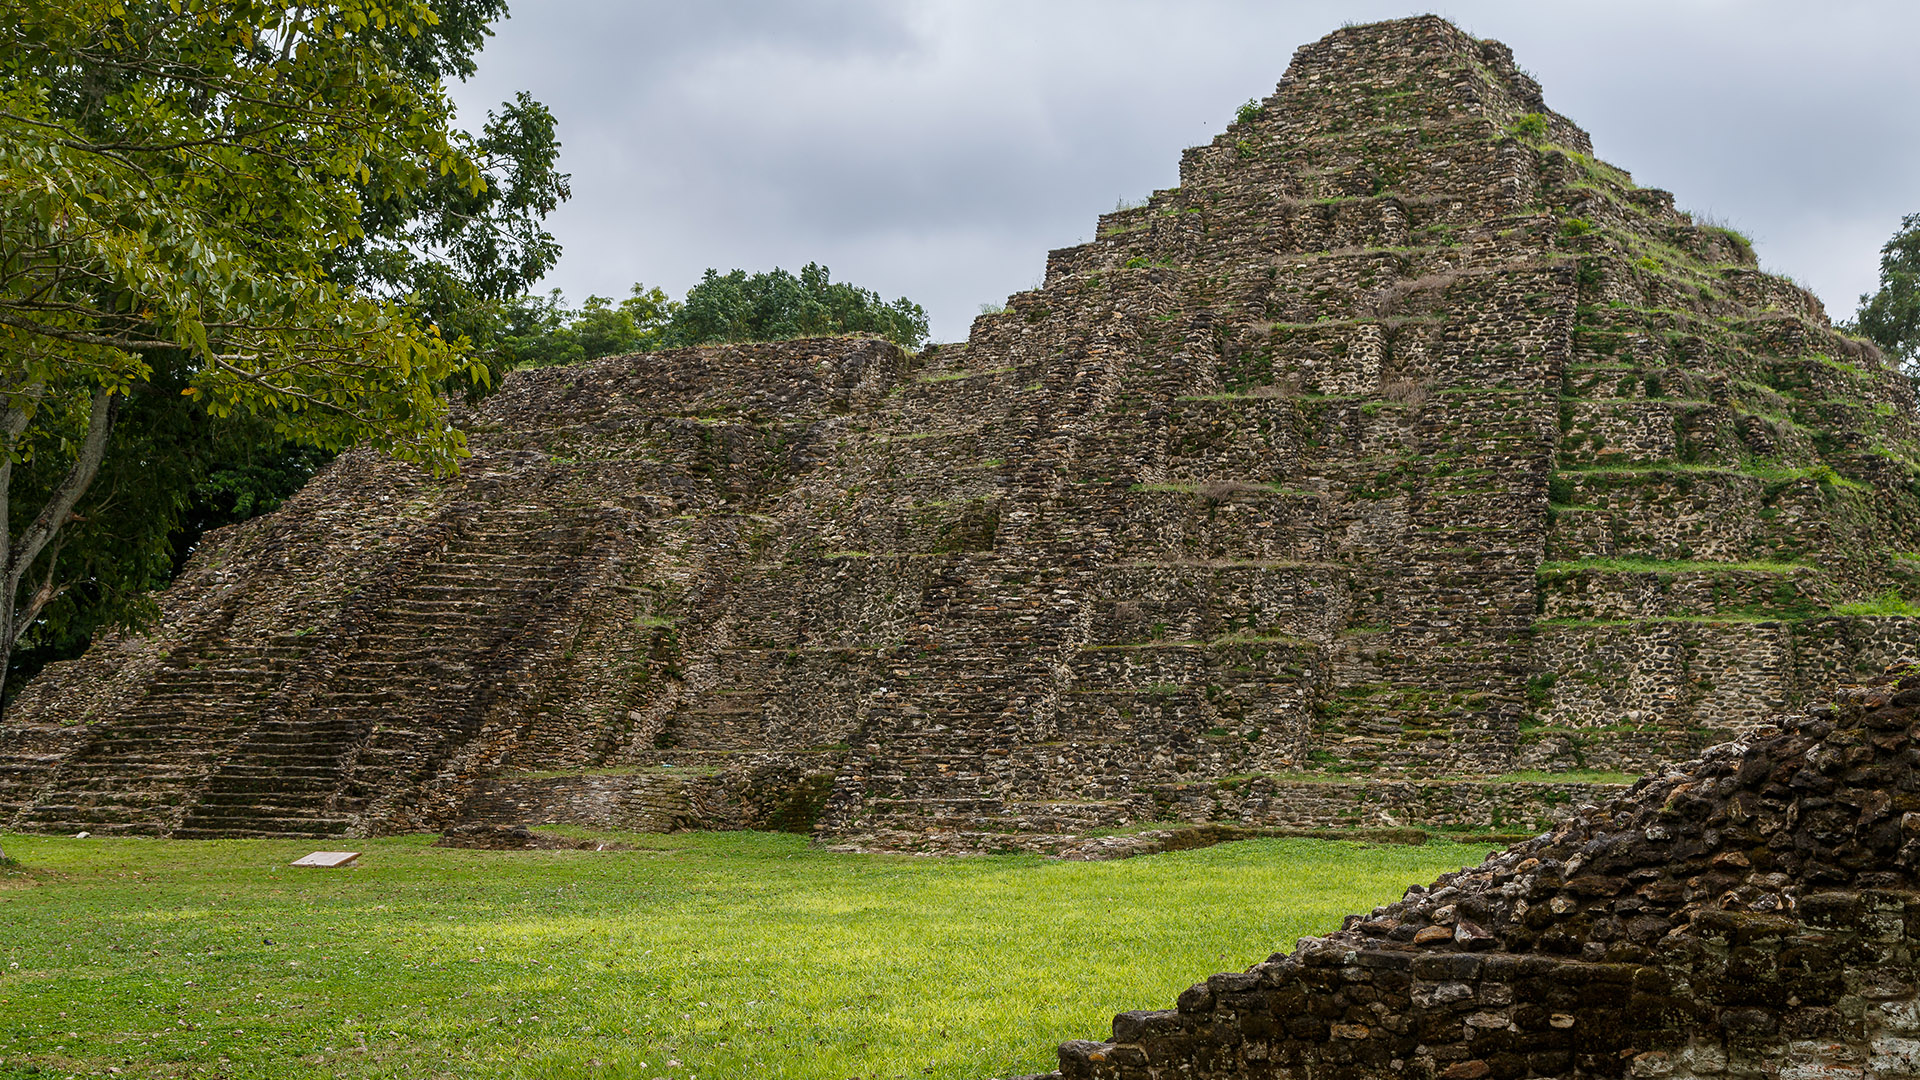 We see the ruins of a stone pyramid on a grassy field near some trees.